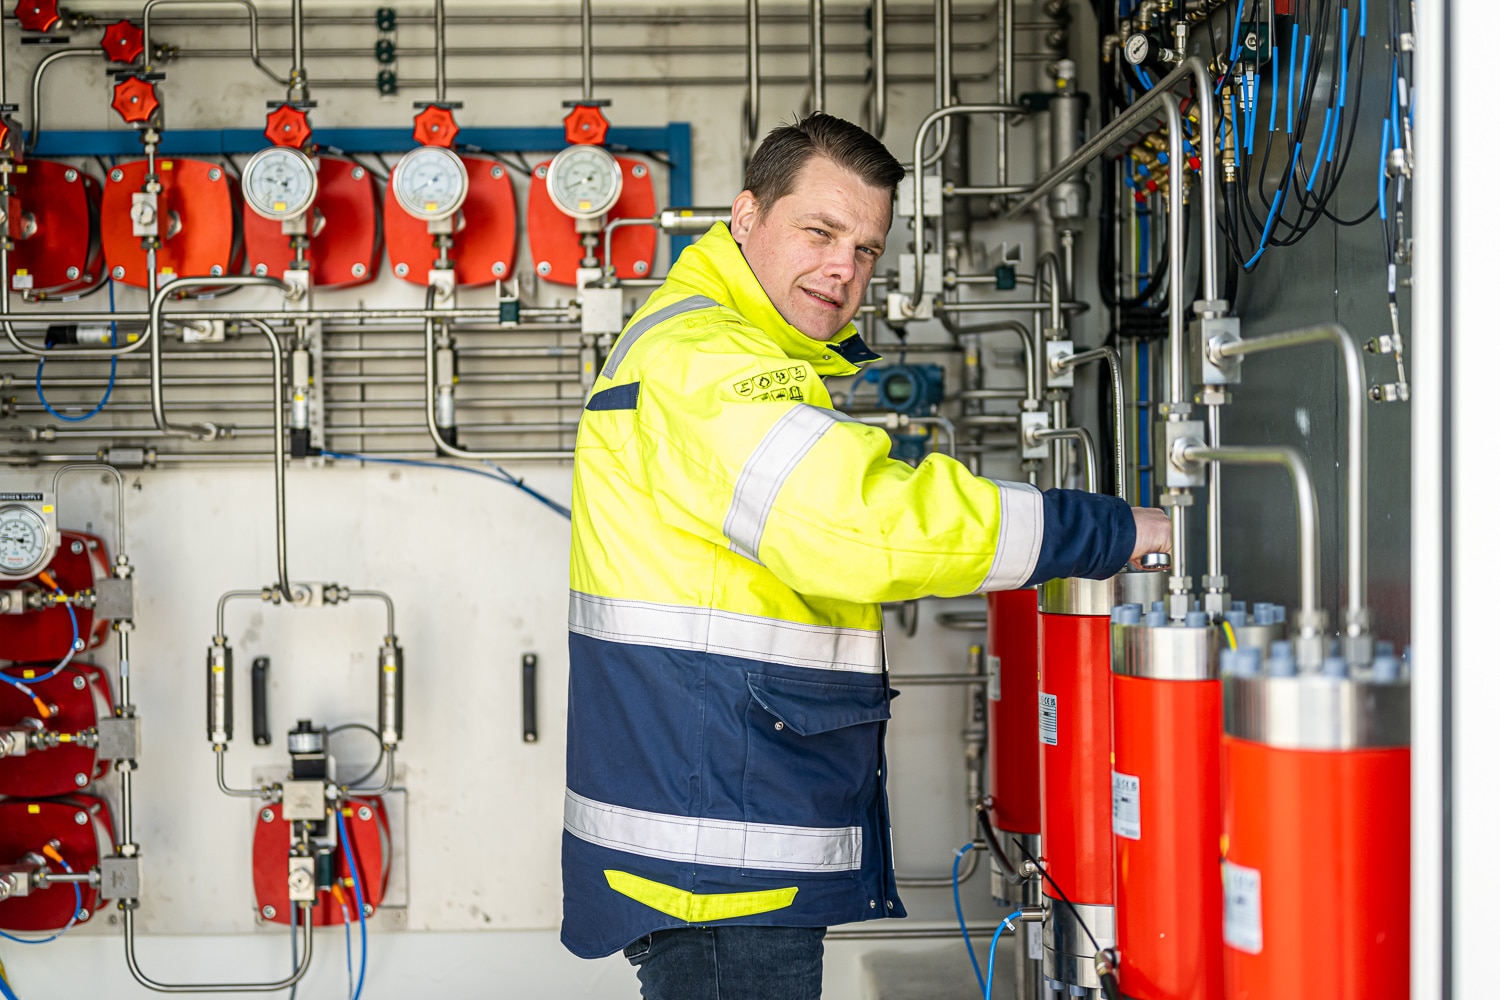 Photo: engineer working on a Resato hydrogen refueling system